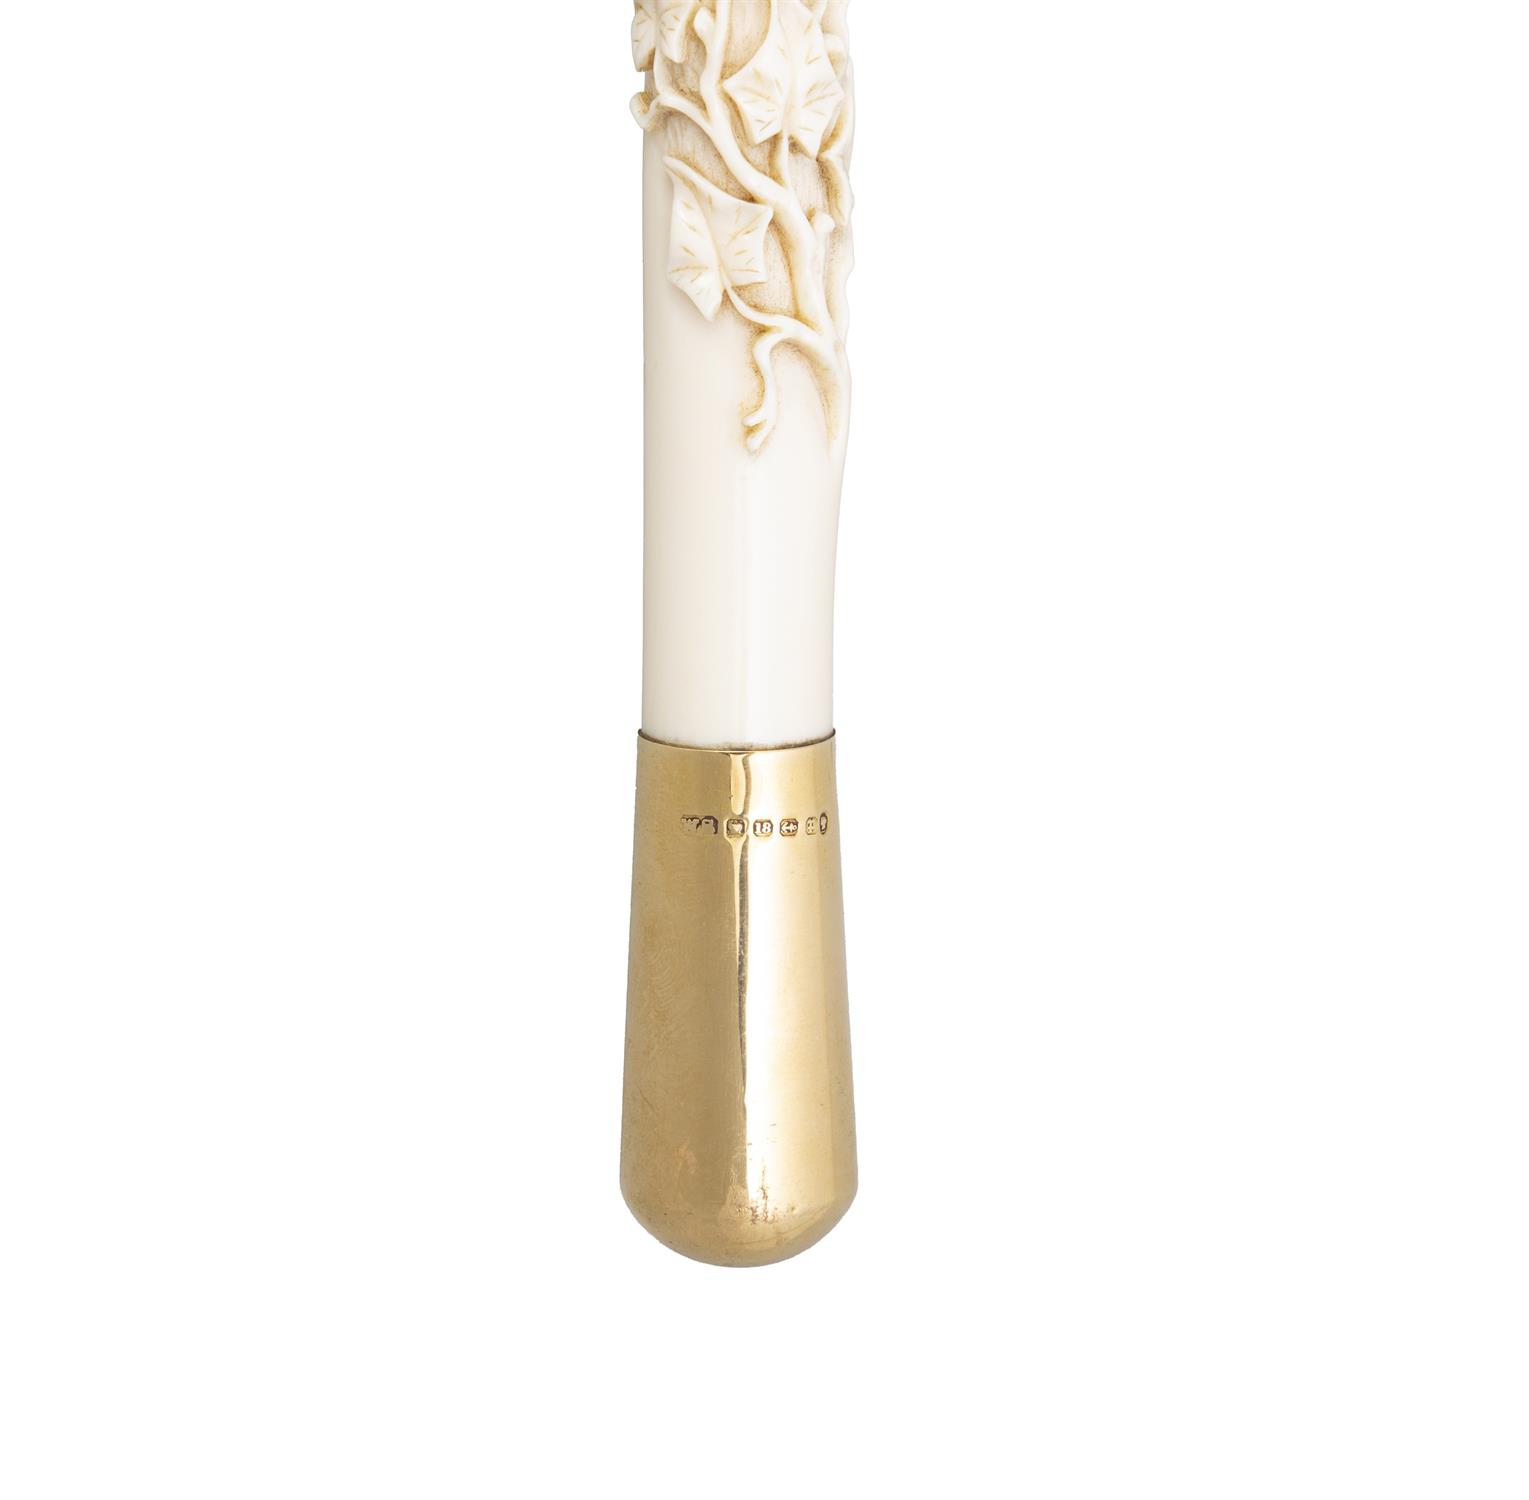 *A VICTORIAN UMBRELLA WITH IVORY CARVED HANDLE, the handle carved with vine leaves and - Image 3 of 10